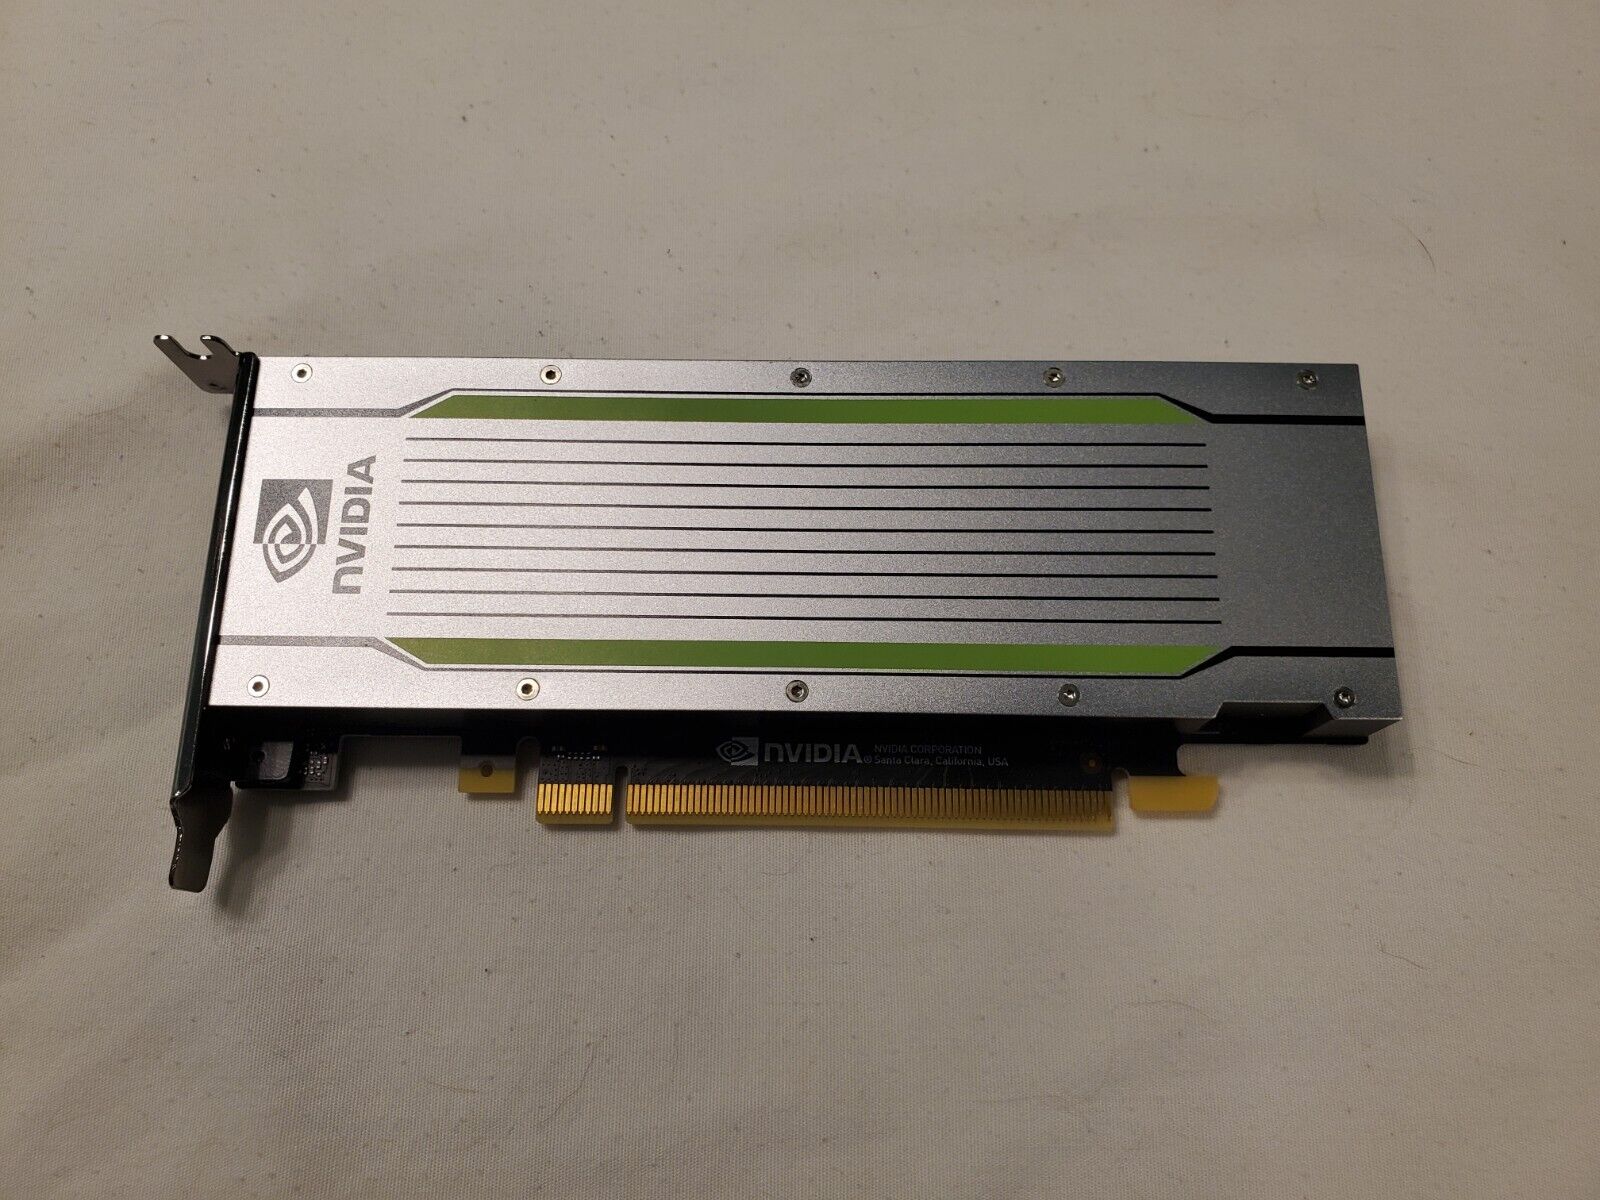 Nvidia Tesla T4 70W 16GB GPU - Excellent Condition - Make an Offer